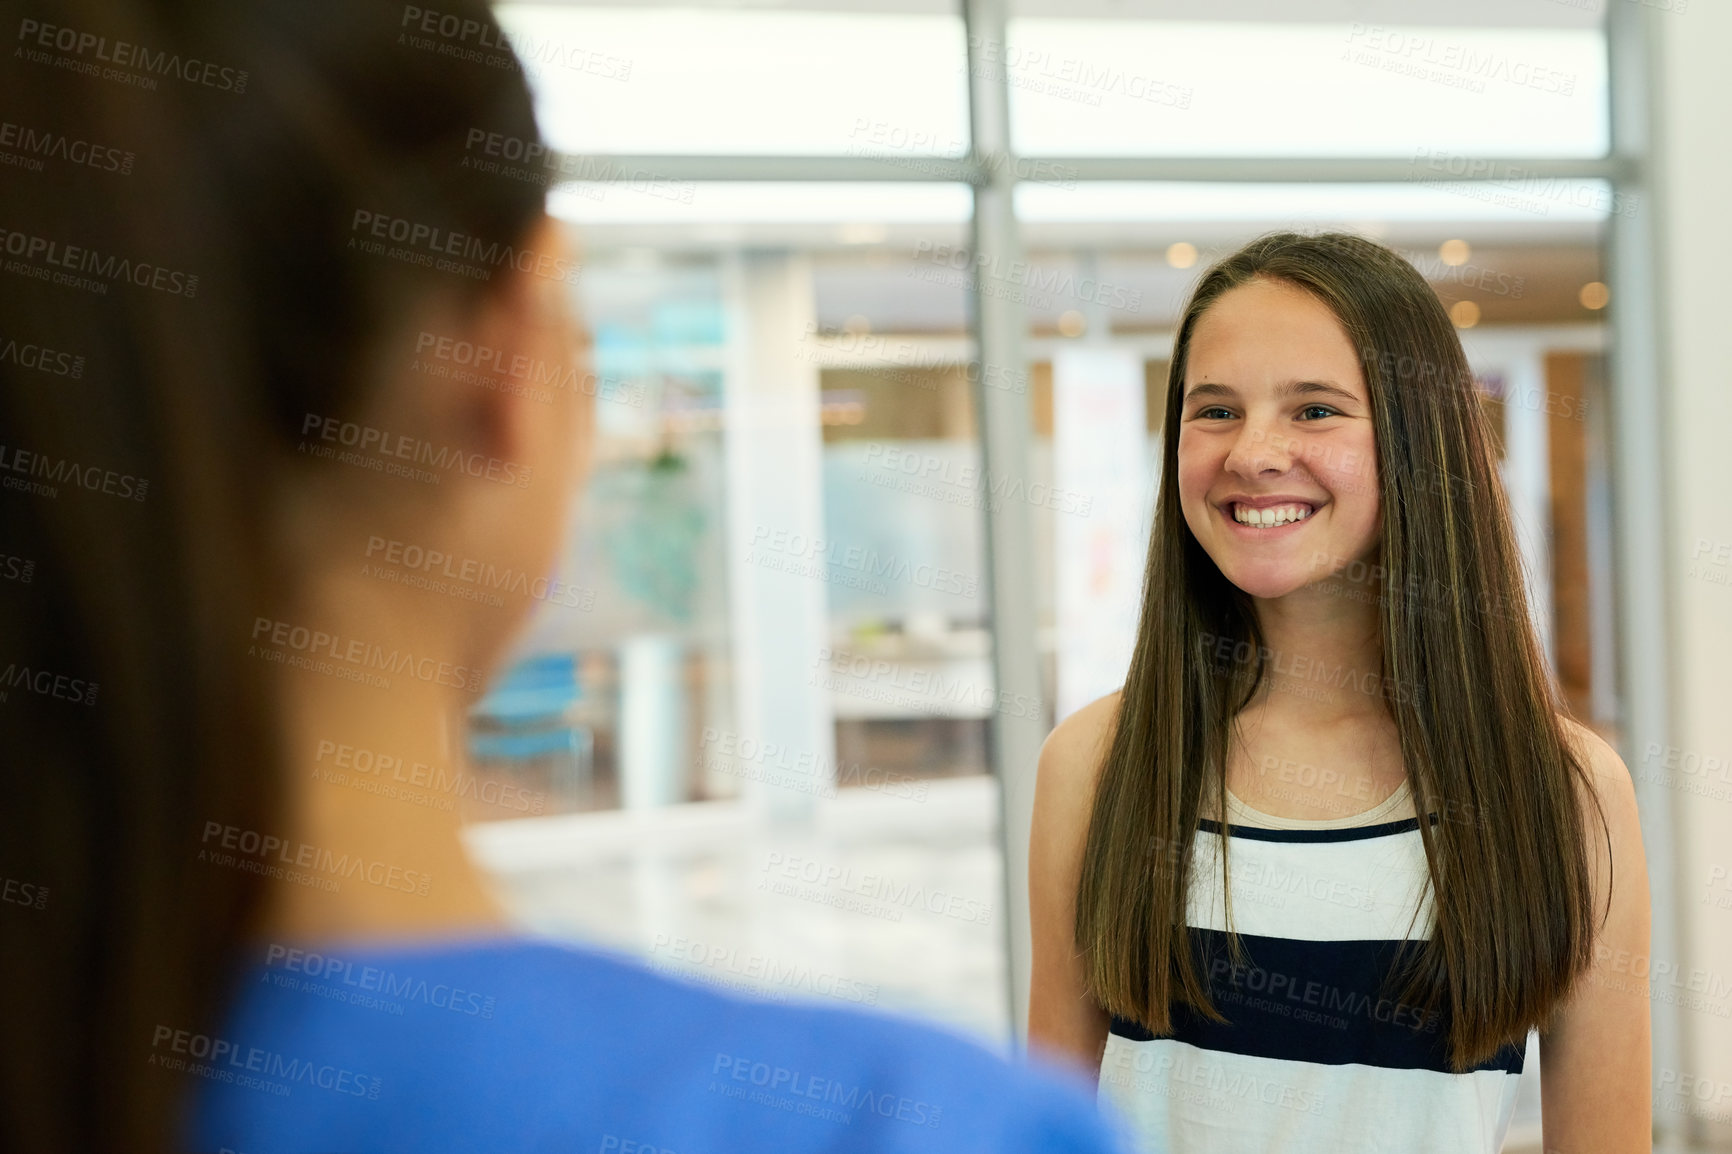 Buy stock photo Rearview shot of a nurse greeting a young patient in the clinic